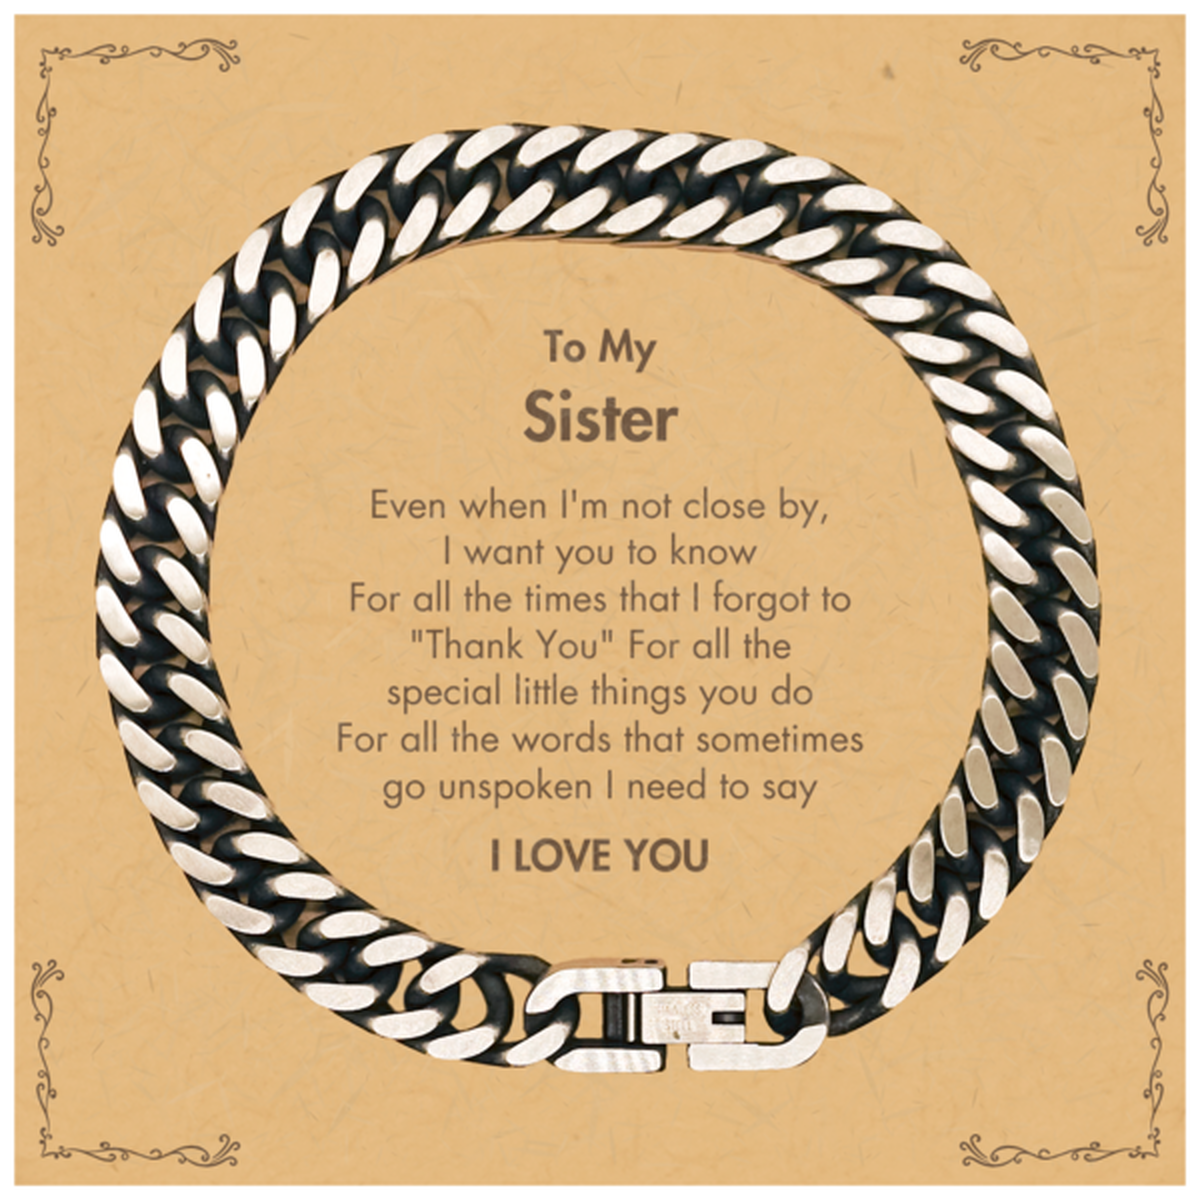 Thank You Gifts for Sister, Keepsake Cuban Link Chain Bracelet Gifts for Sister Birthday Mother's day Father's Day Sister For all the words That sometimes go unspoken I need to say I LOVE YOU